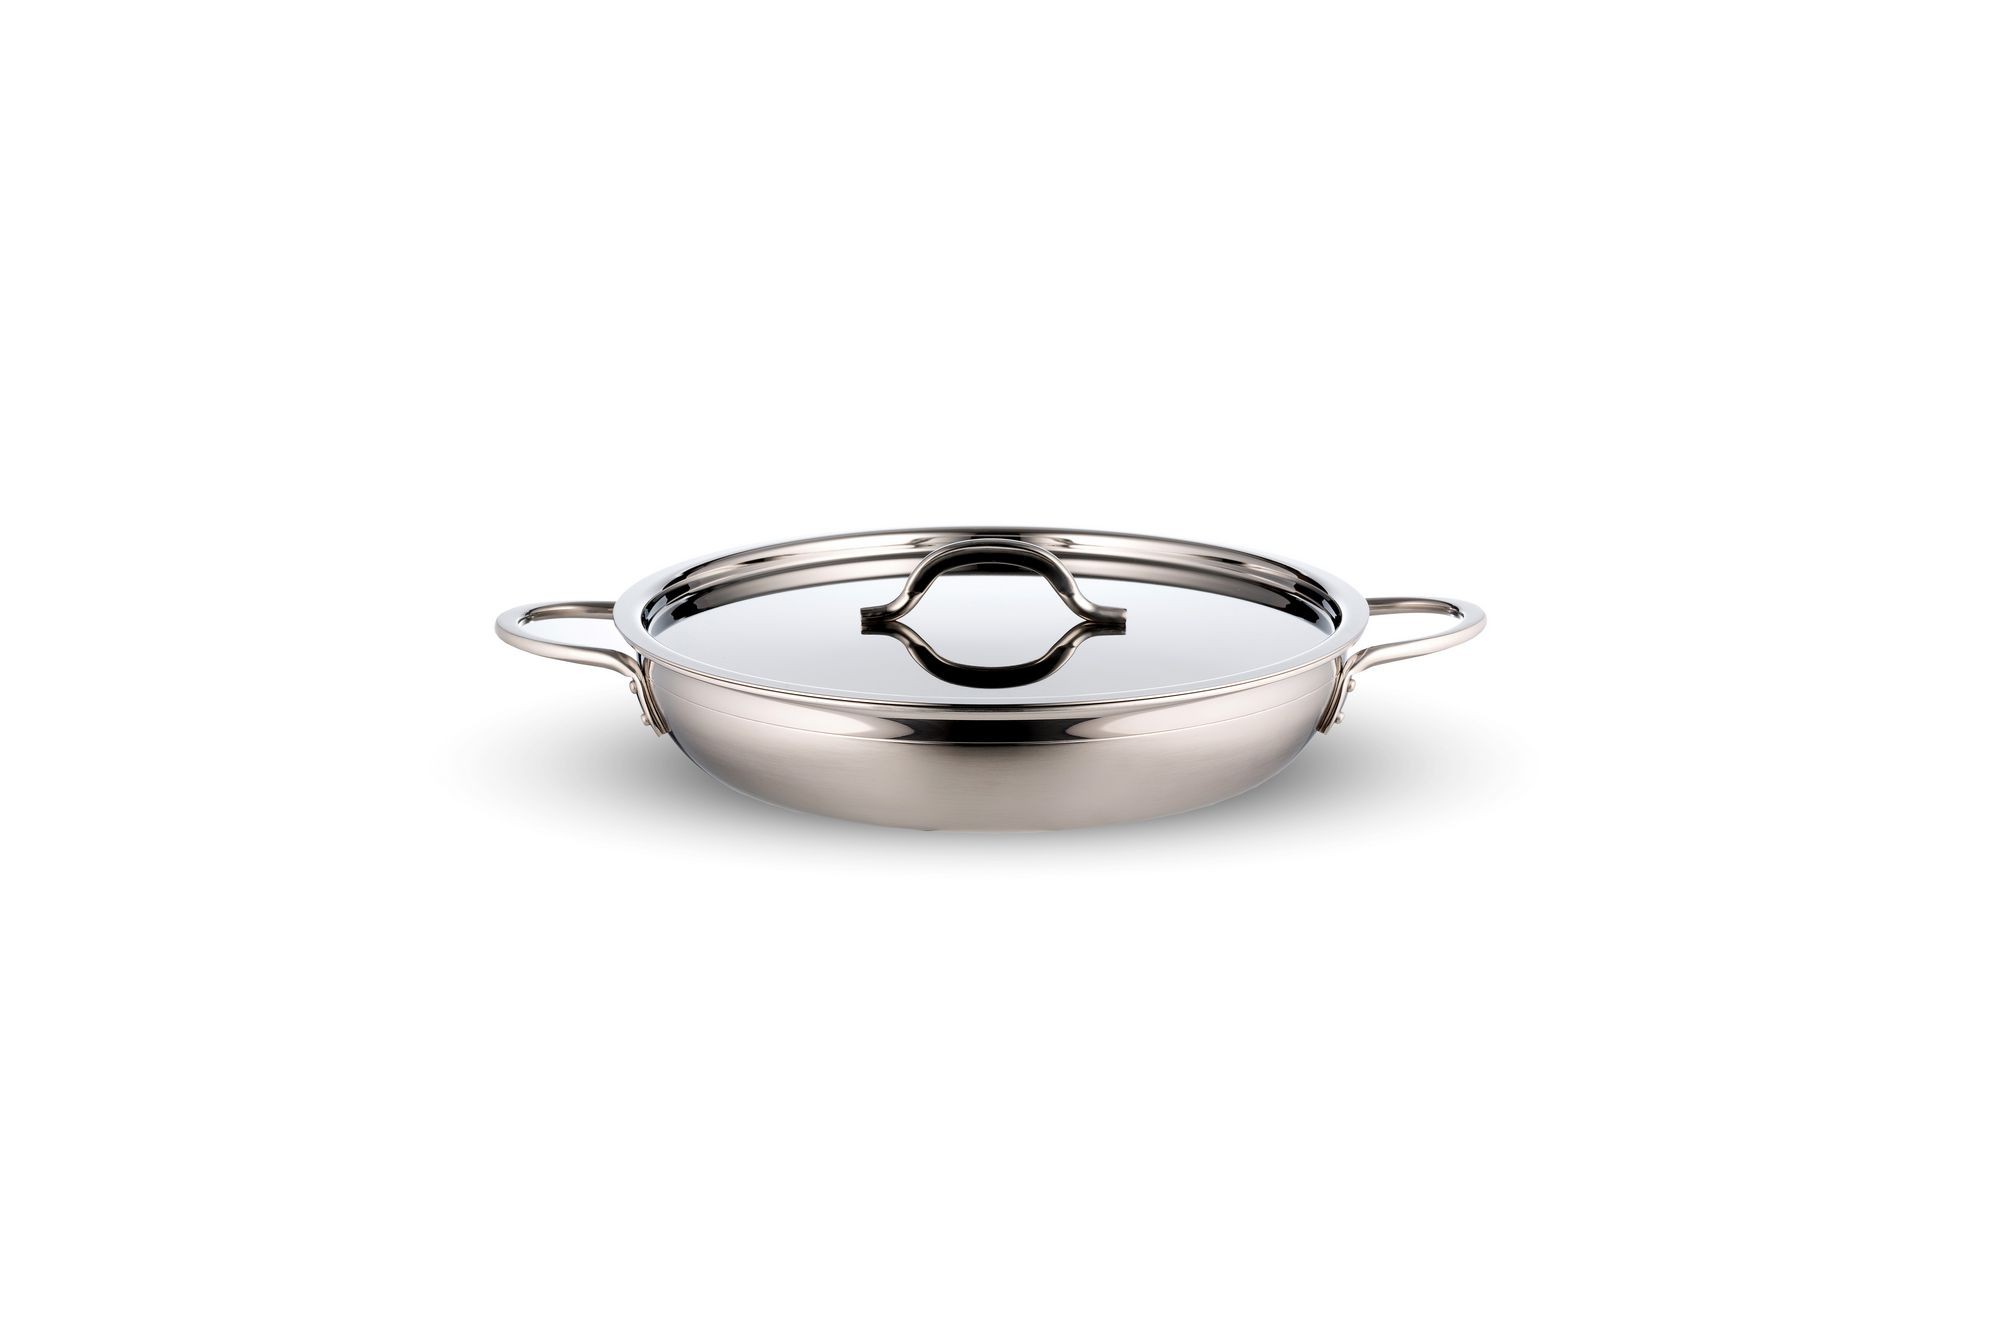 Bon Chef 60304-2ToneSS Country French Two Tone Stainless Steel Saute Pan with Cover, Double Handle, 1 Qt. 20 oz.